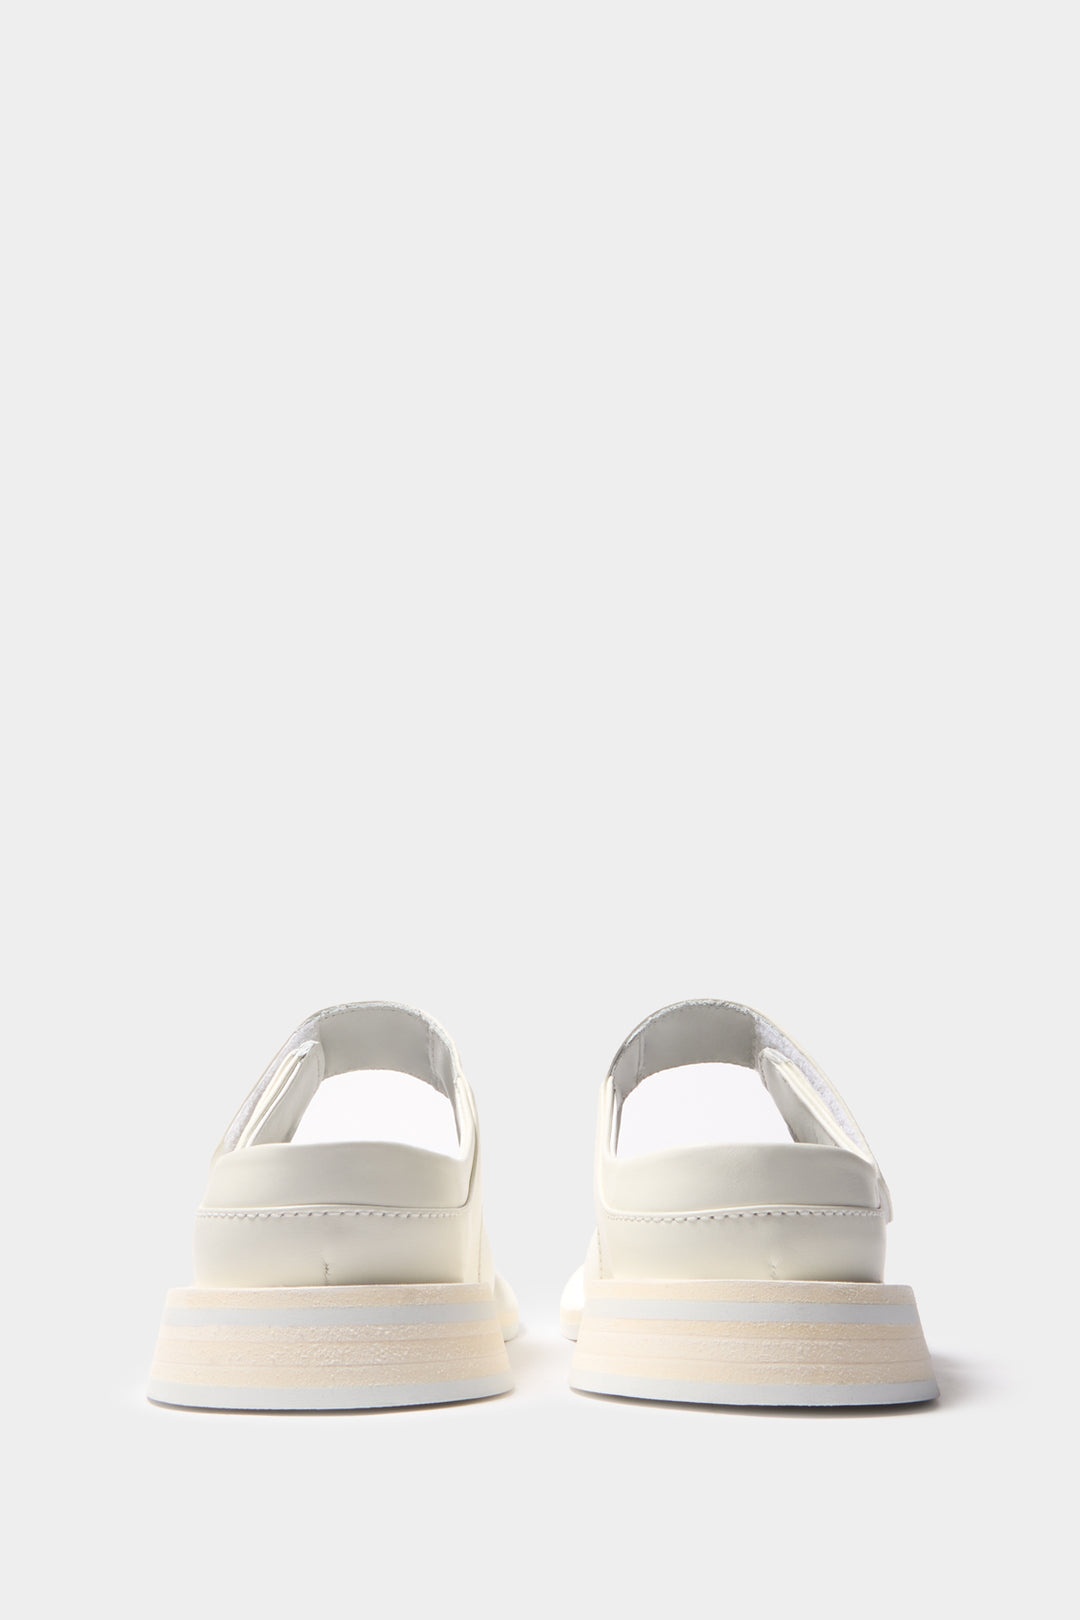 FORM MARG SABOT SHOES / off white - 3